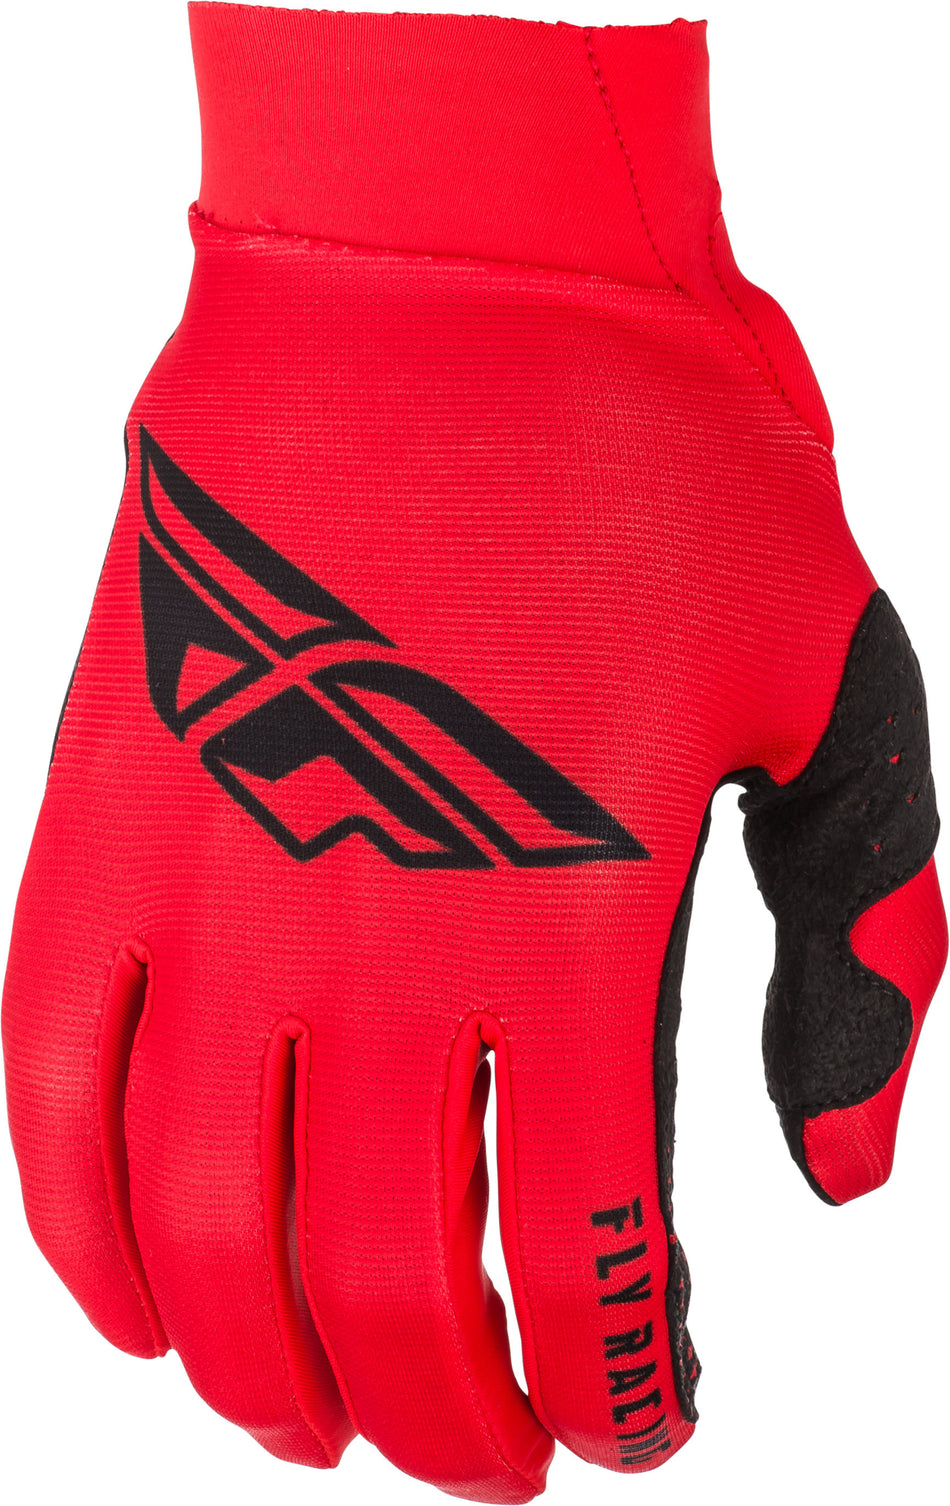 FLY RACING Pro Lite Gloves Red/Black Sz 06 372-81206